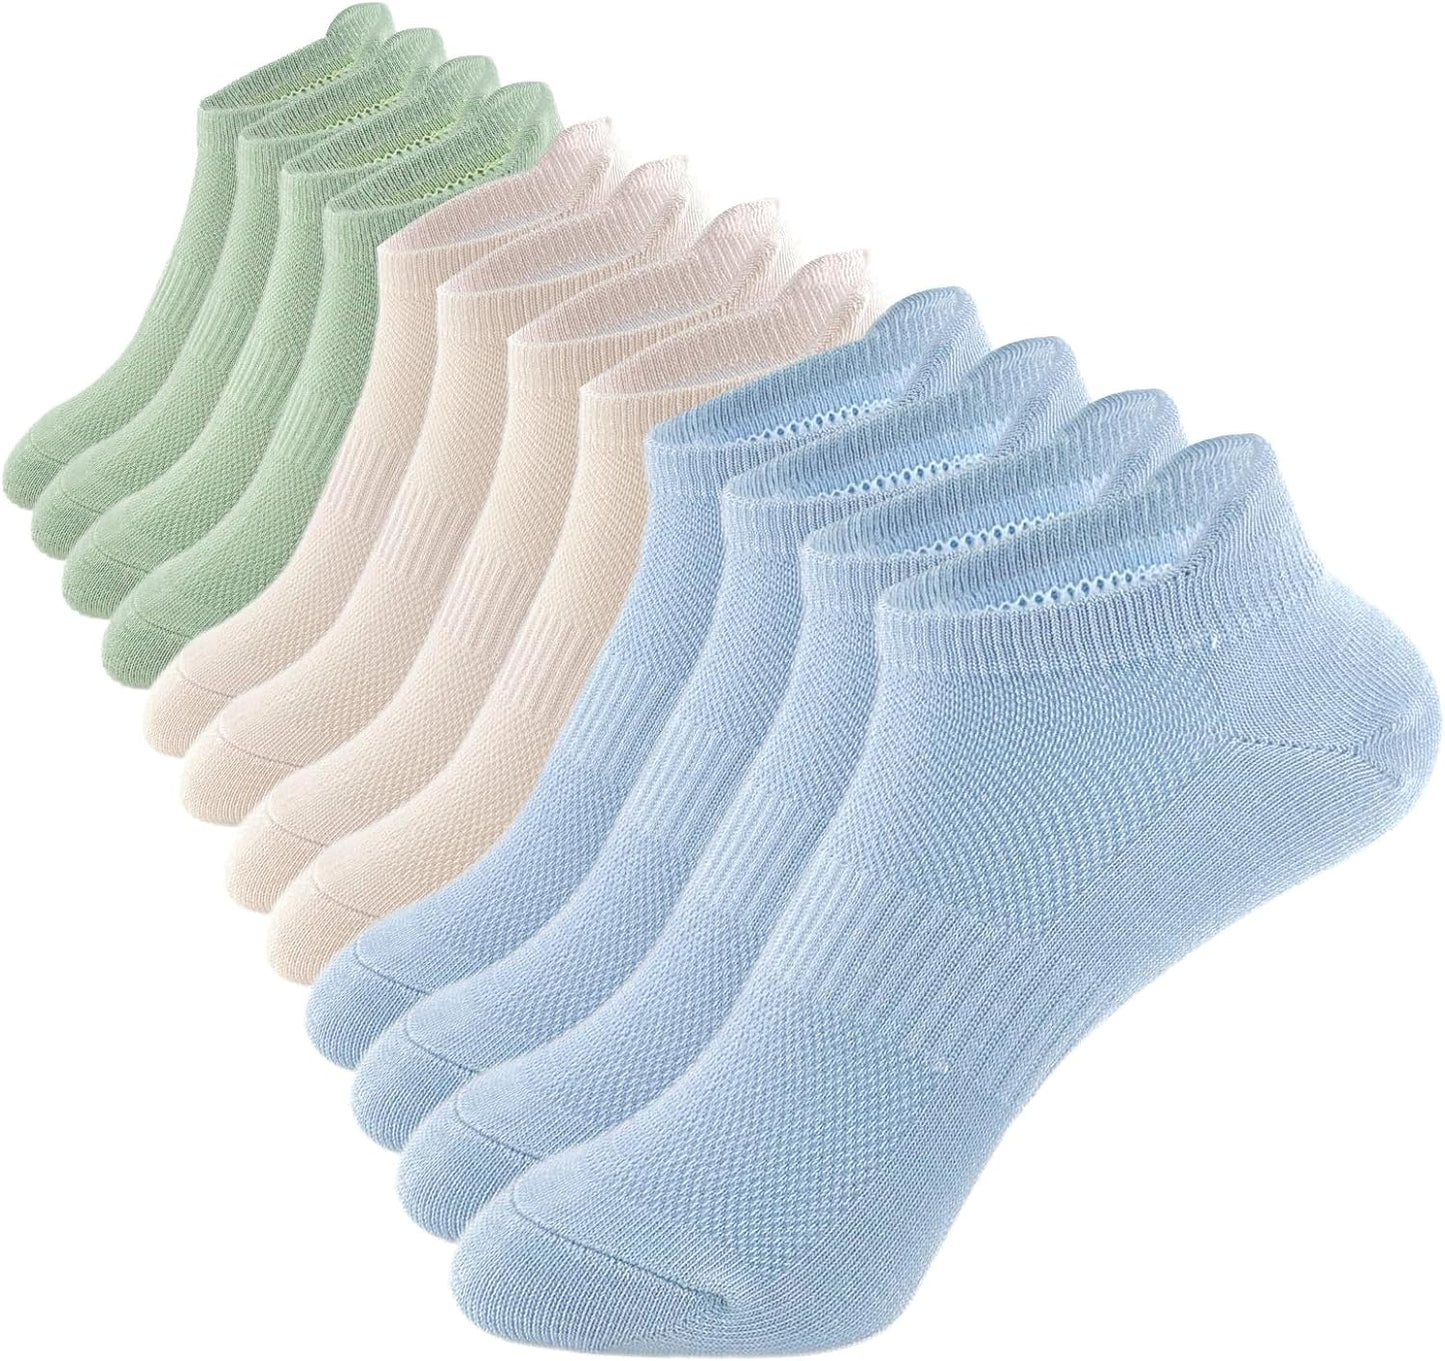 Womens Ankle Socks Athletic Running Low Cut Socks With Tab 6 Pairs